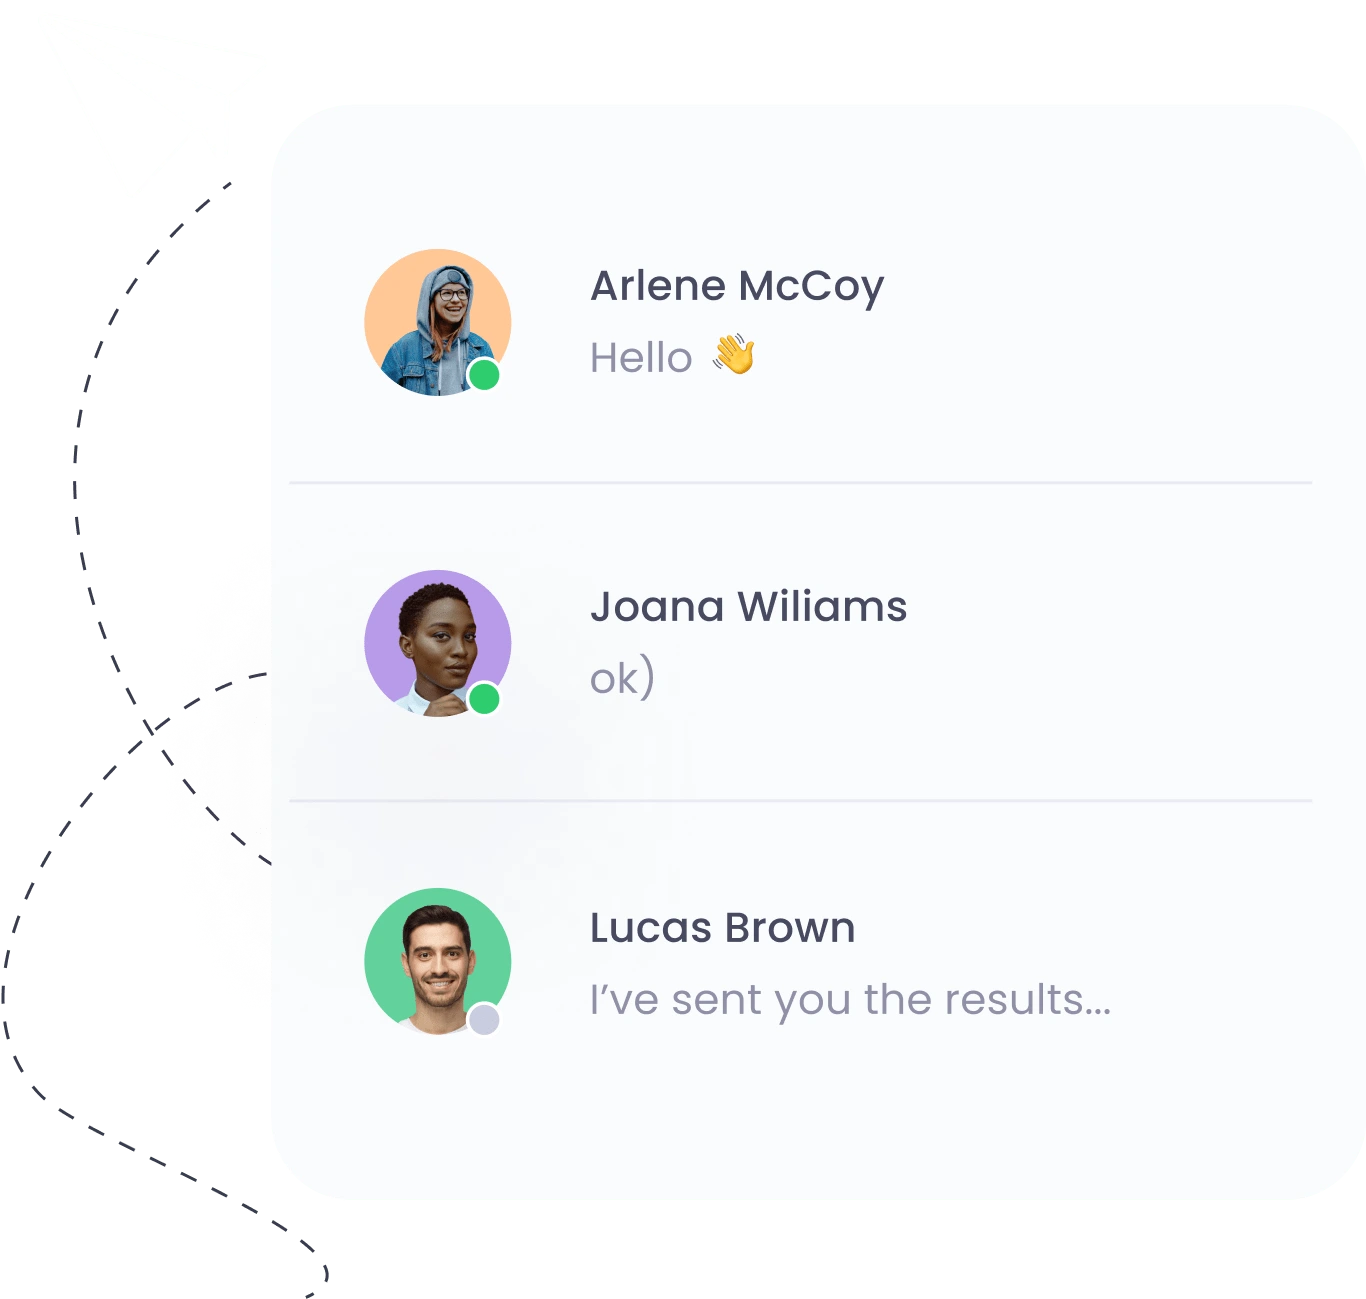 Team Chat | WebWork features